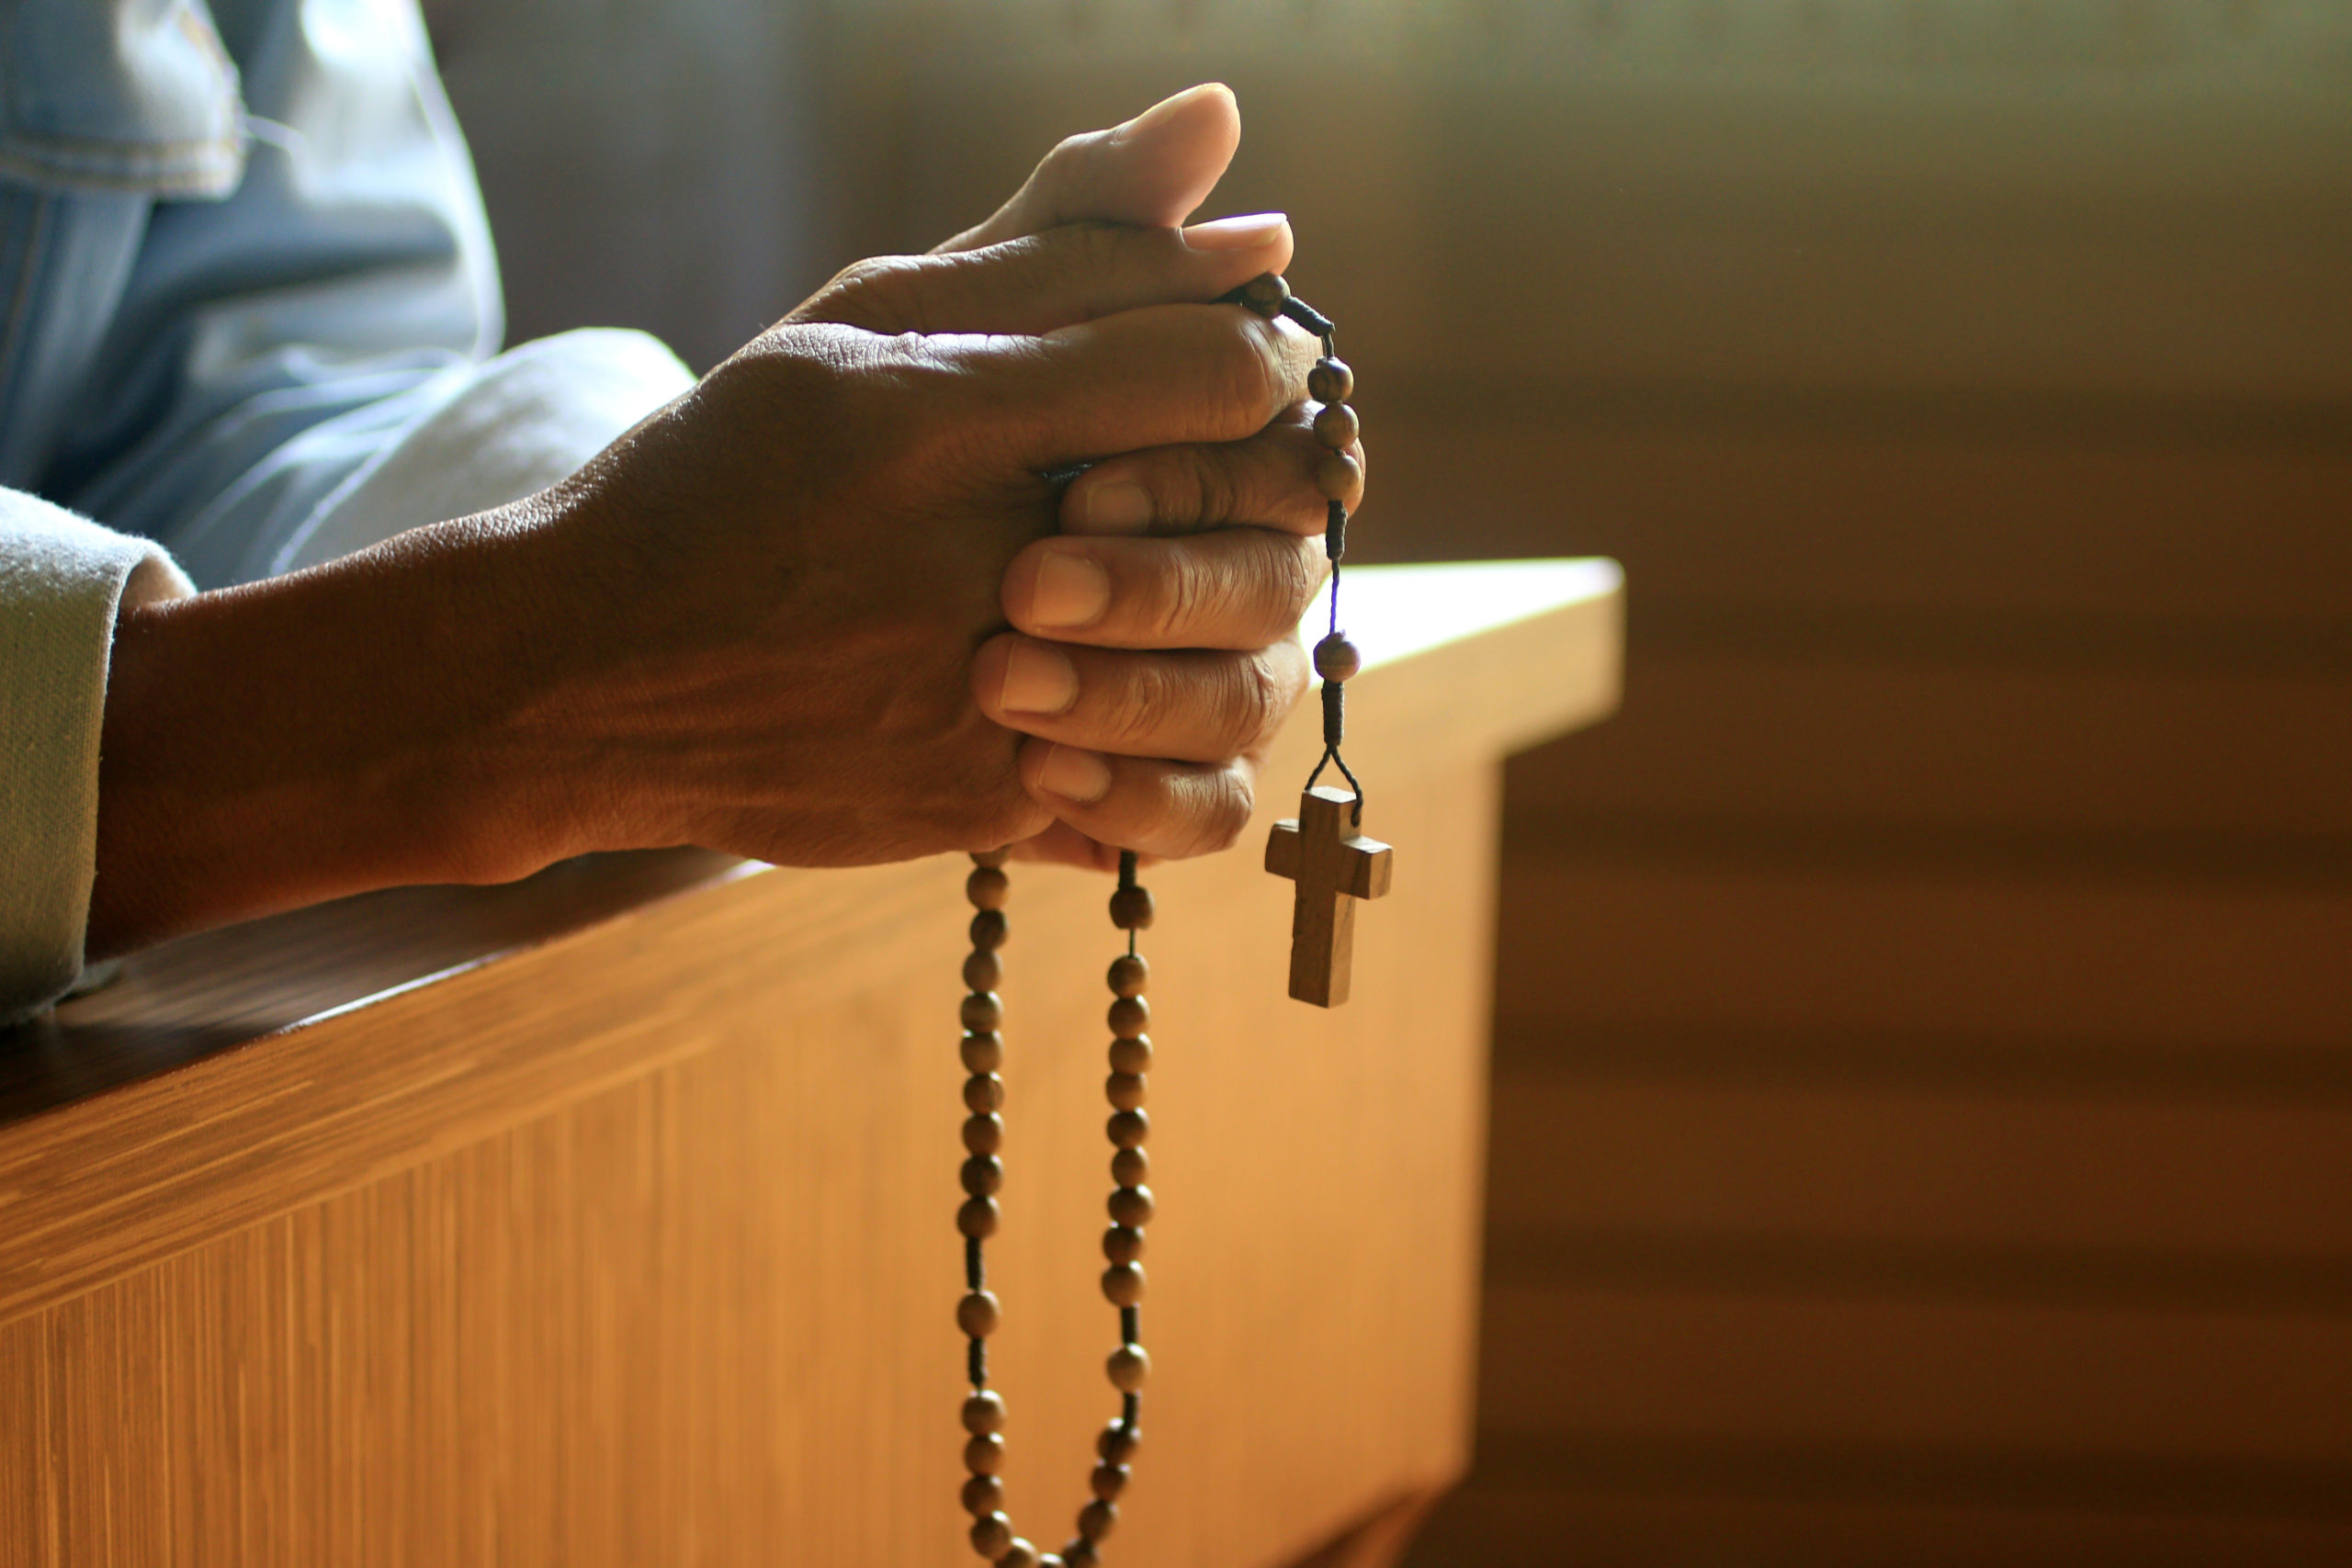 Senior man kneel, holding wooden rosary beads in hand with Jesus Christ holy cross crucifix in the church. Natural light background. Prayer pose crop closeup with copy space. Catholic symbol of faith.